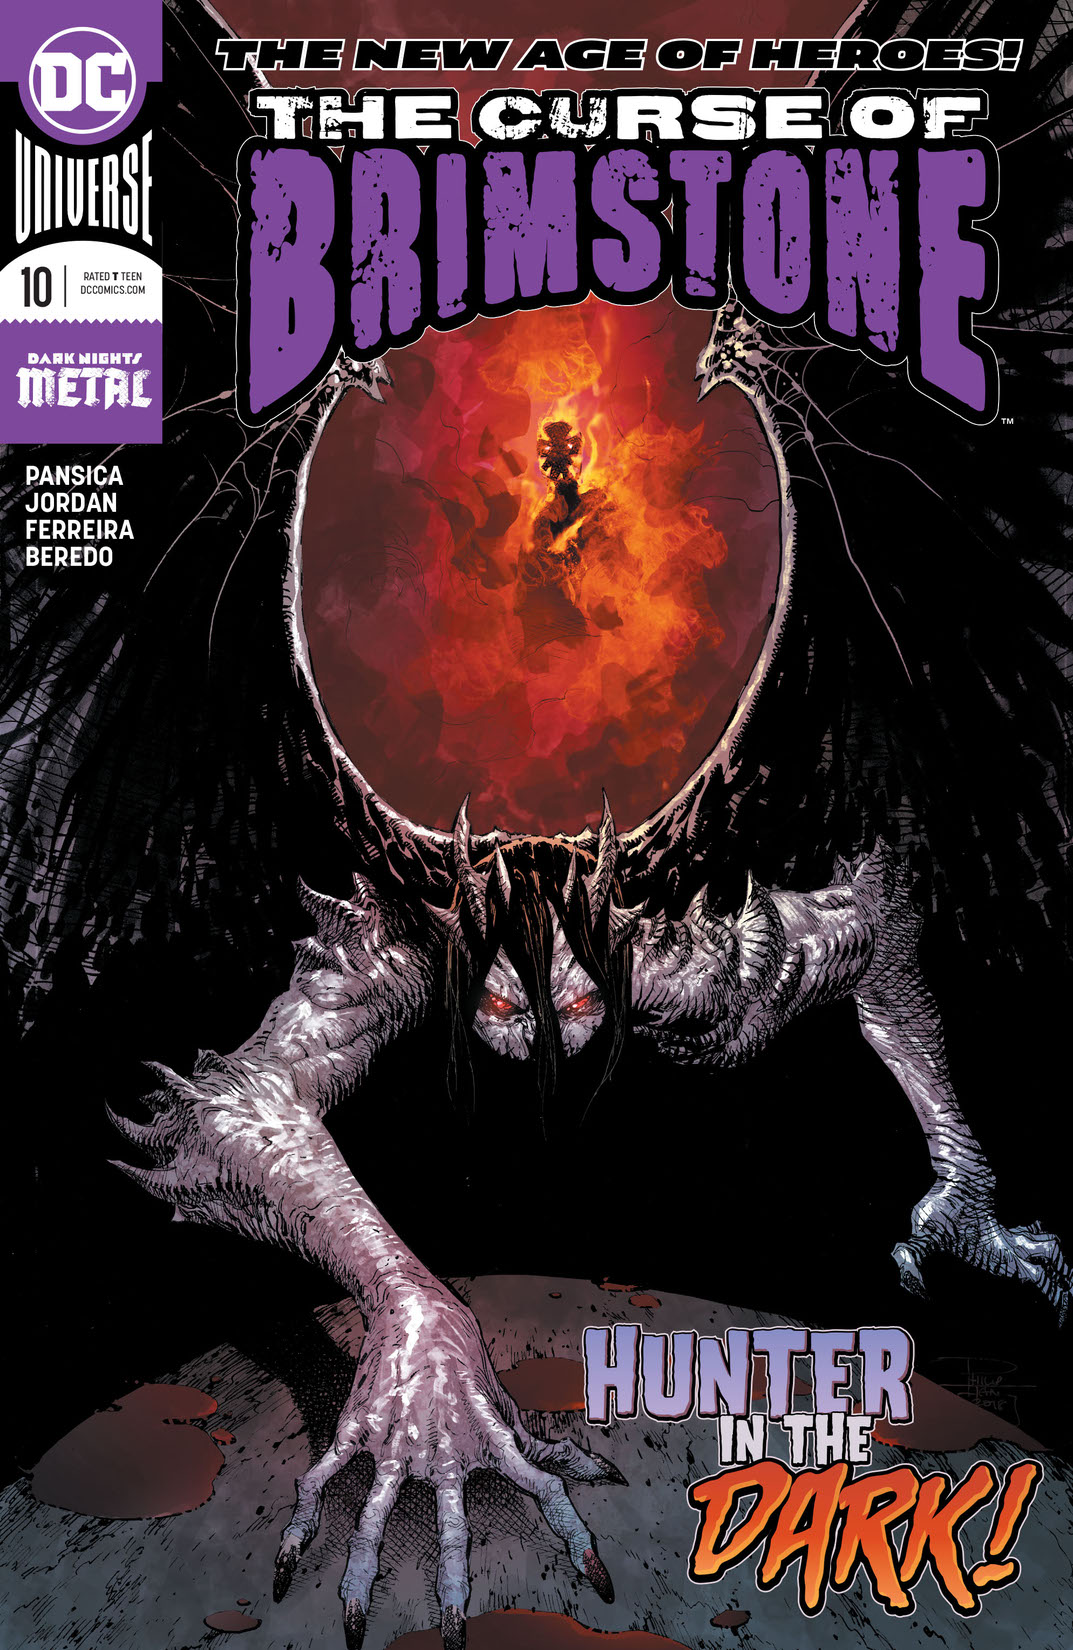 The Curse of Brimstone #10 preview images